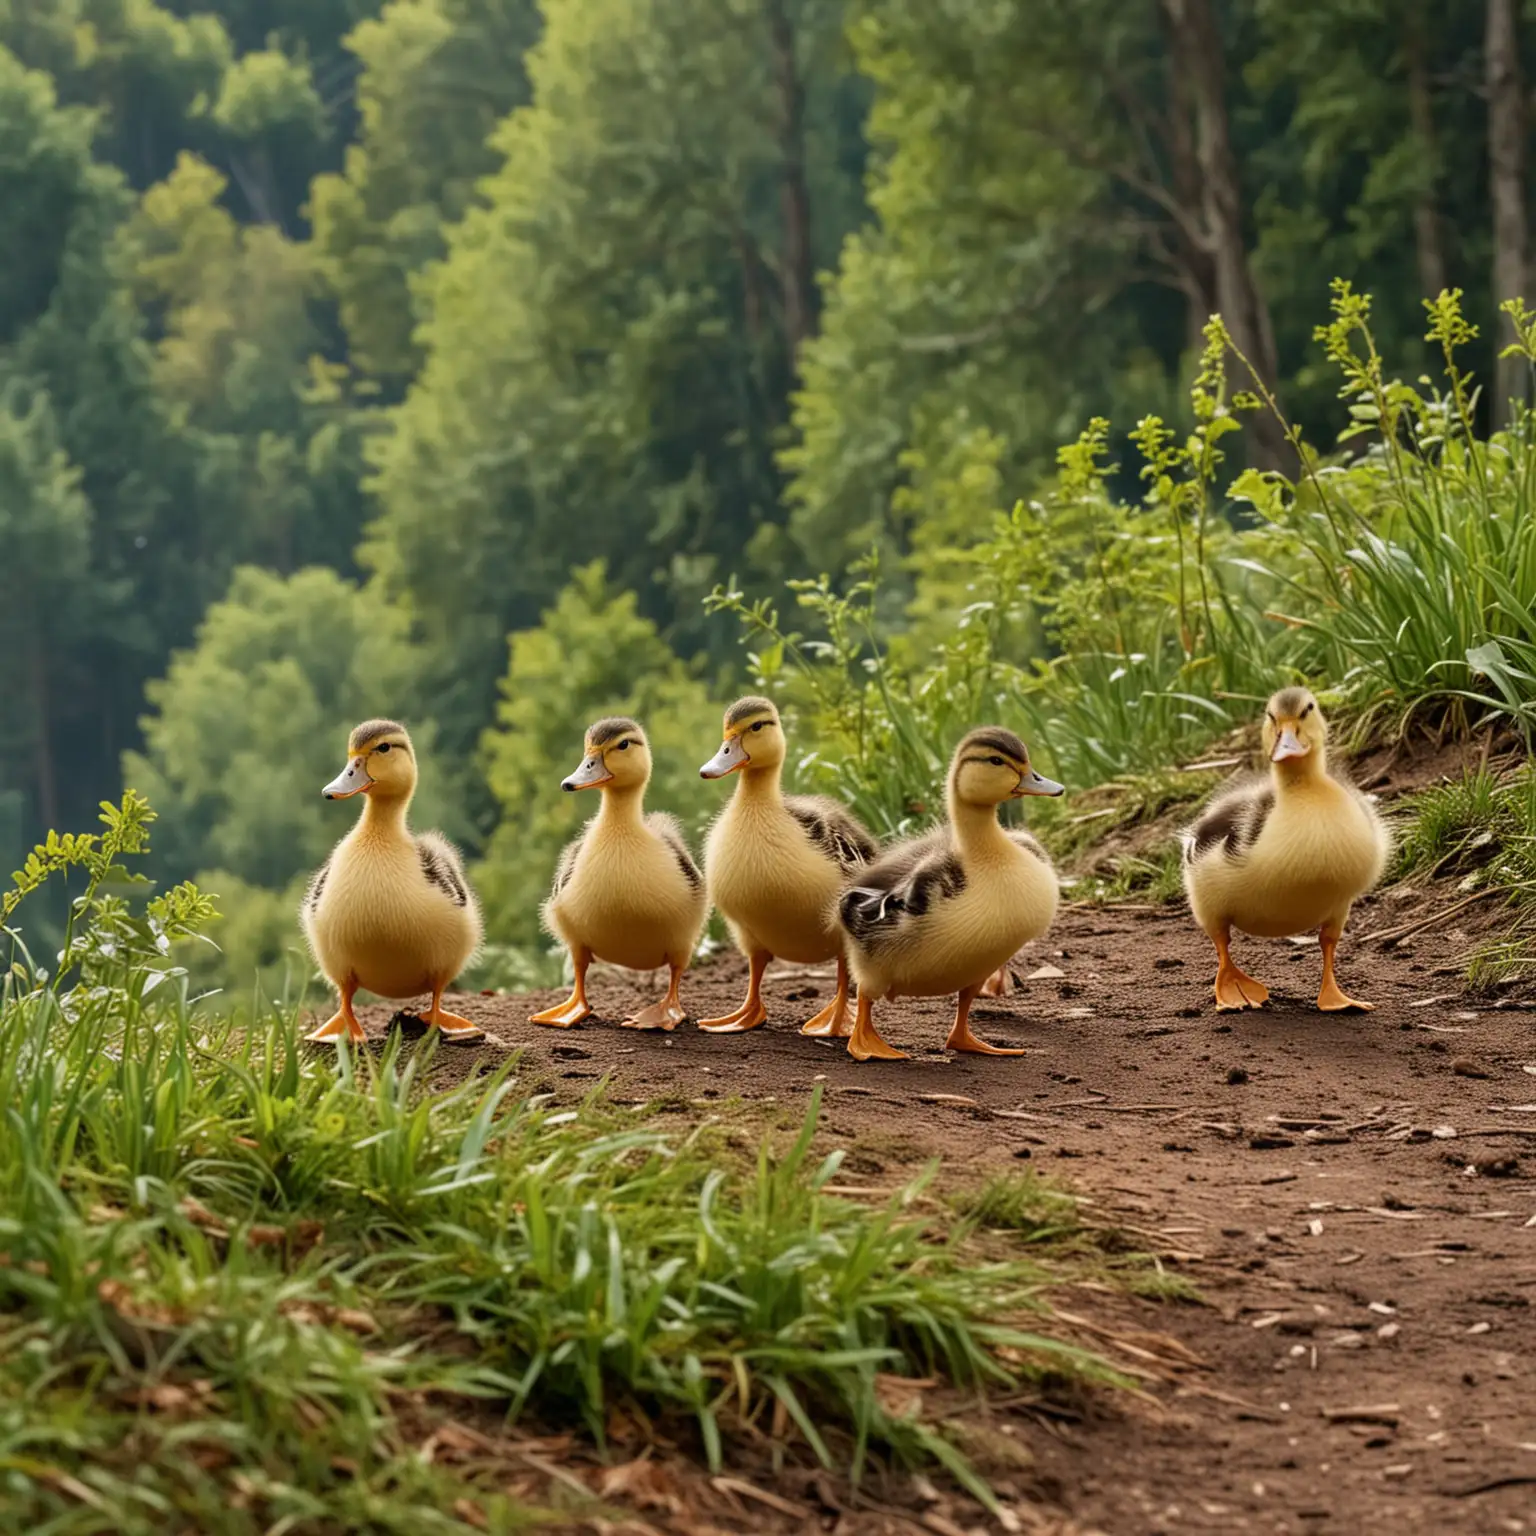 Five Little Ducks Walking Up a Hill in a Serene Forest Setting